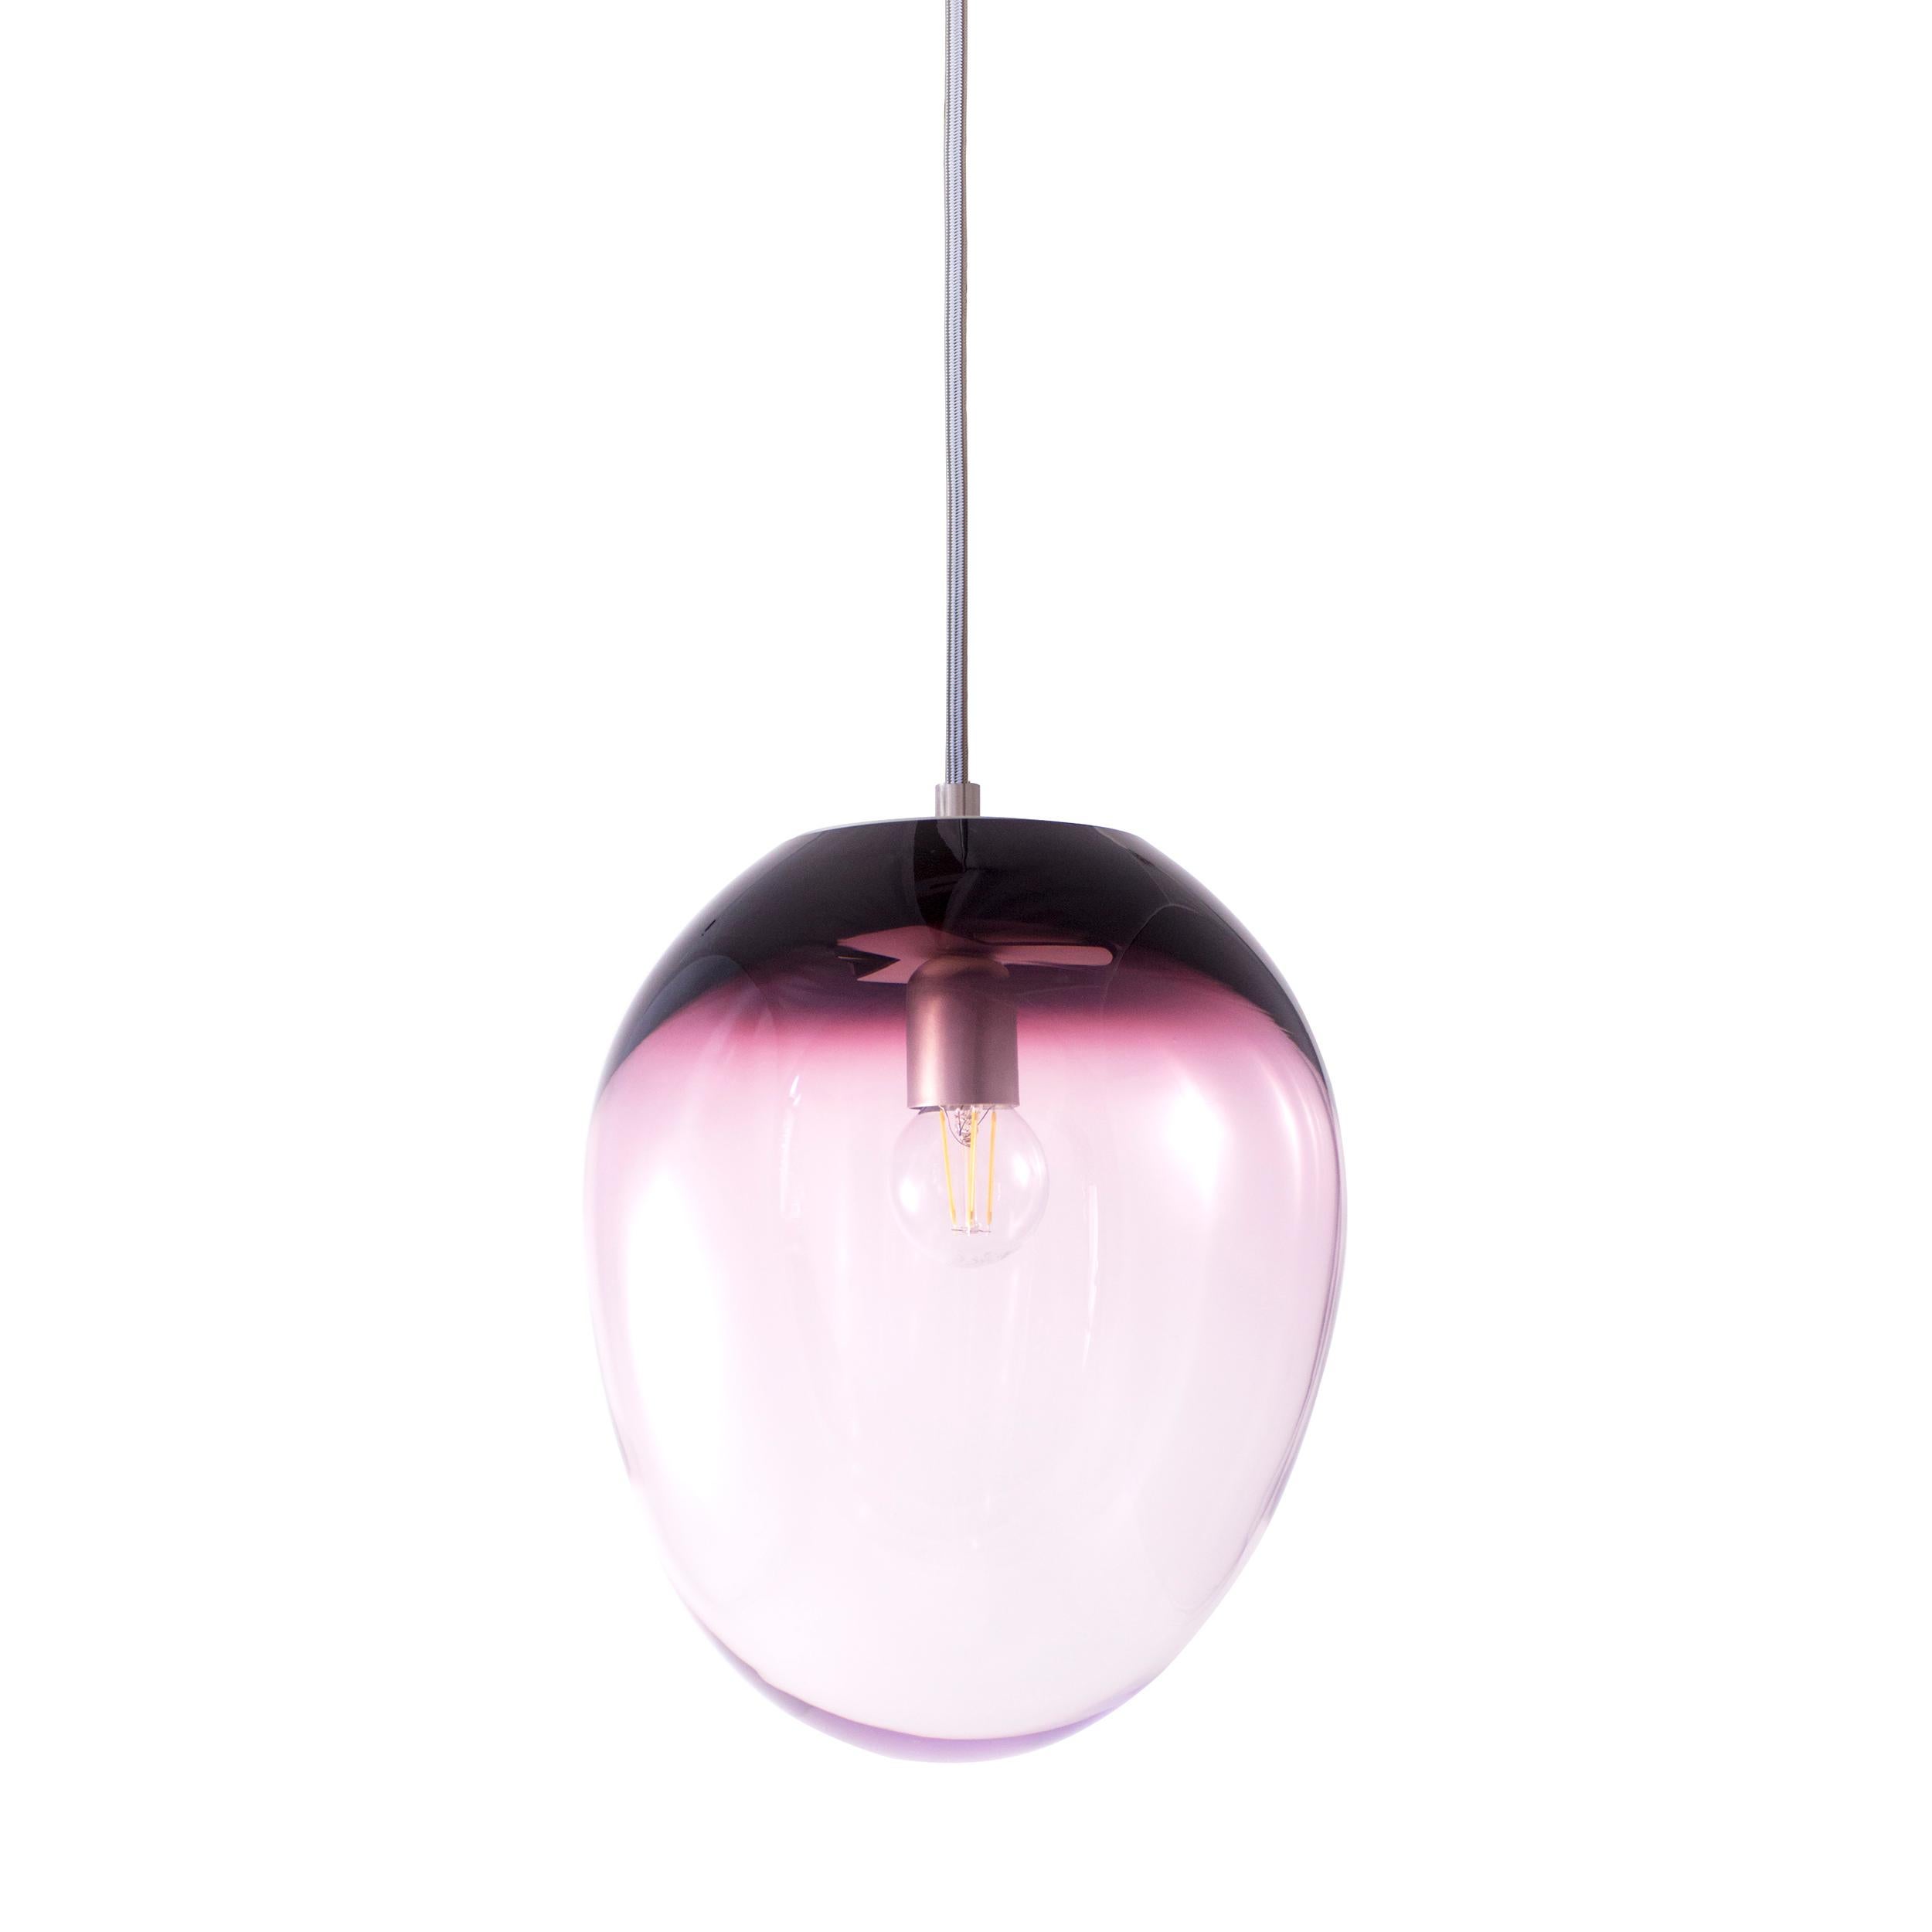 Planetoide astrea purple iridescent pendant by ELOA.
No UL listed 
Material: glass, steel, silver, LED bulb.
Dimensions: D 30 x W 30 x H 250 cm.
Also available in different colours and dimensions.

All our lamps can be wired according to each